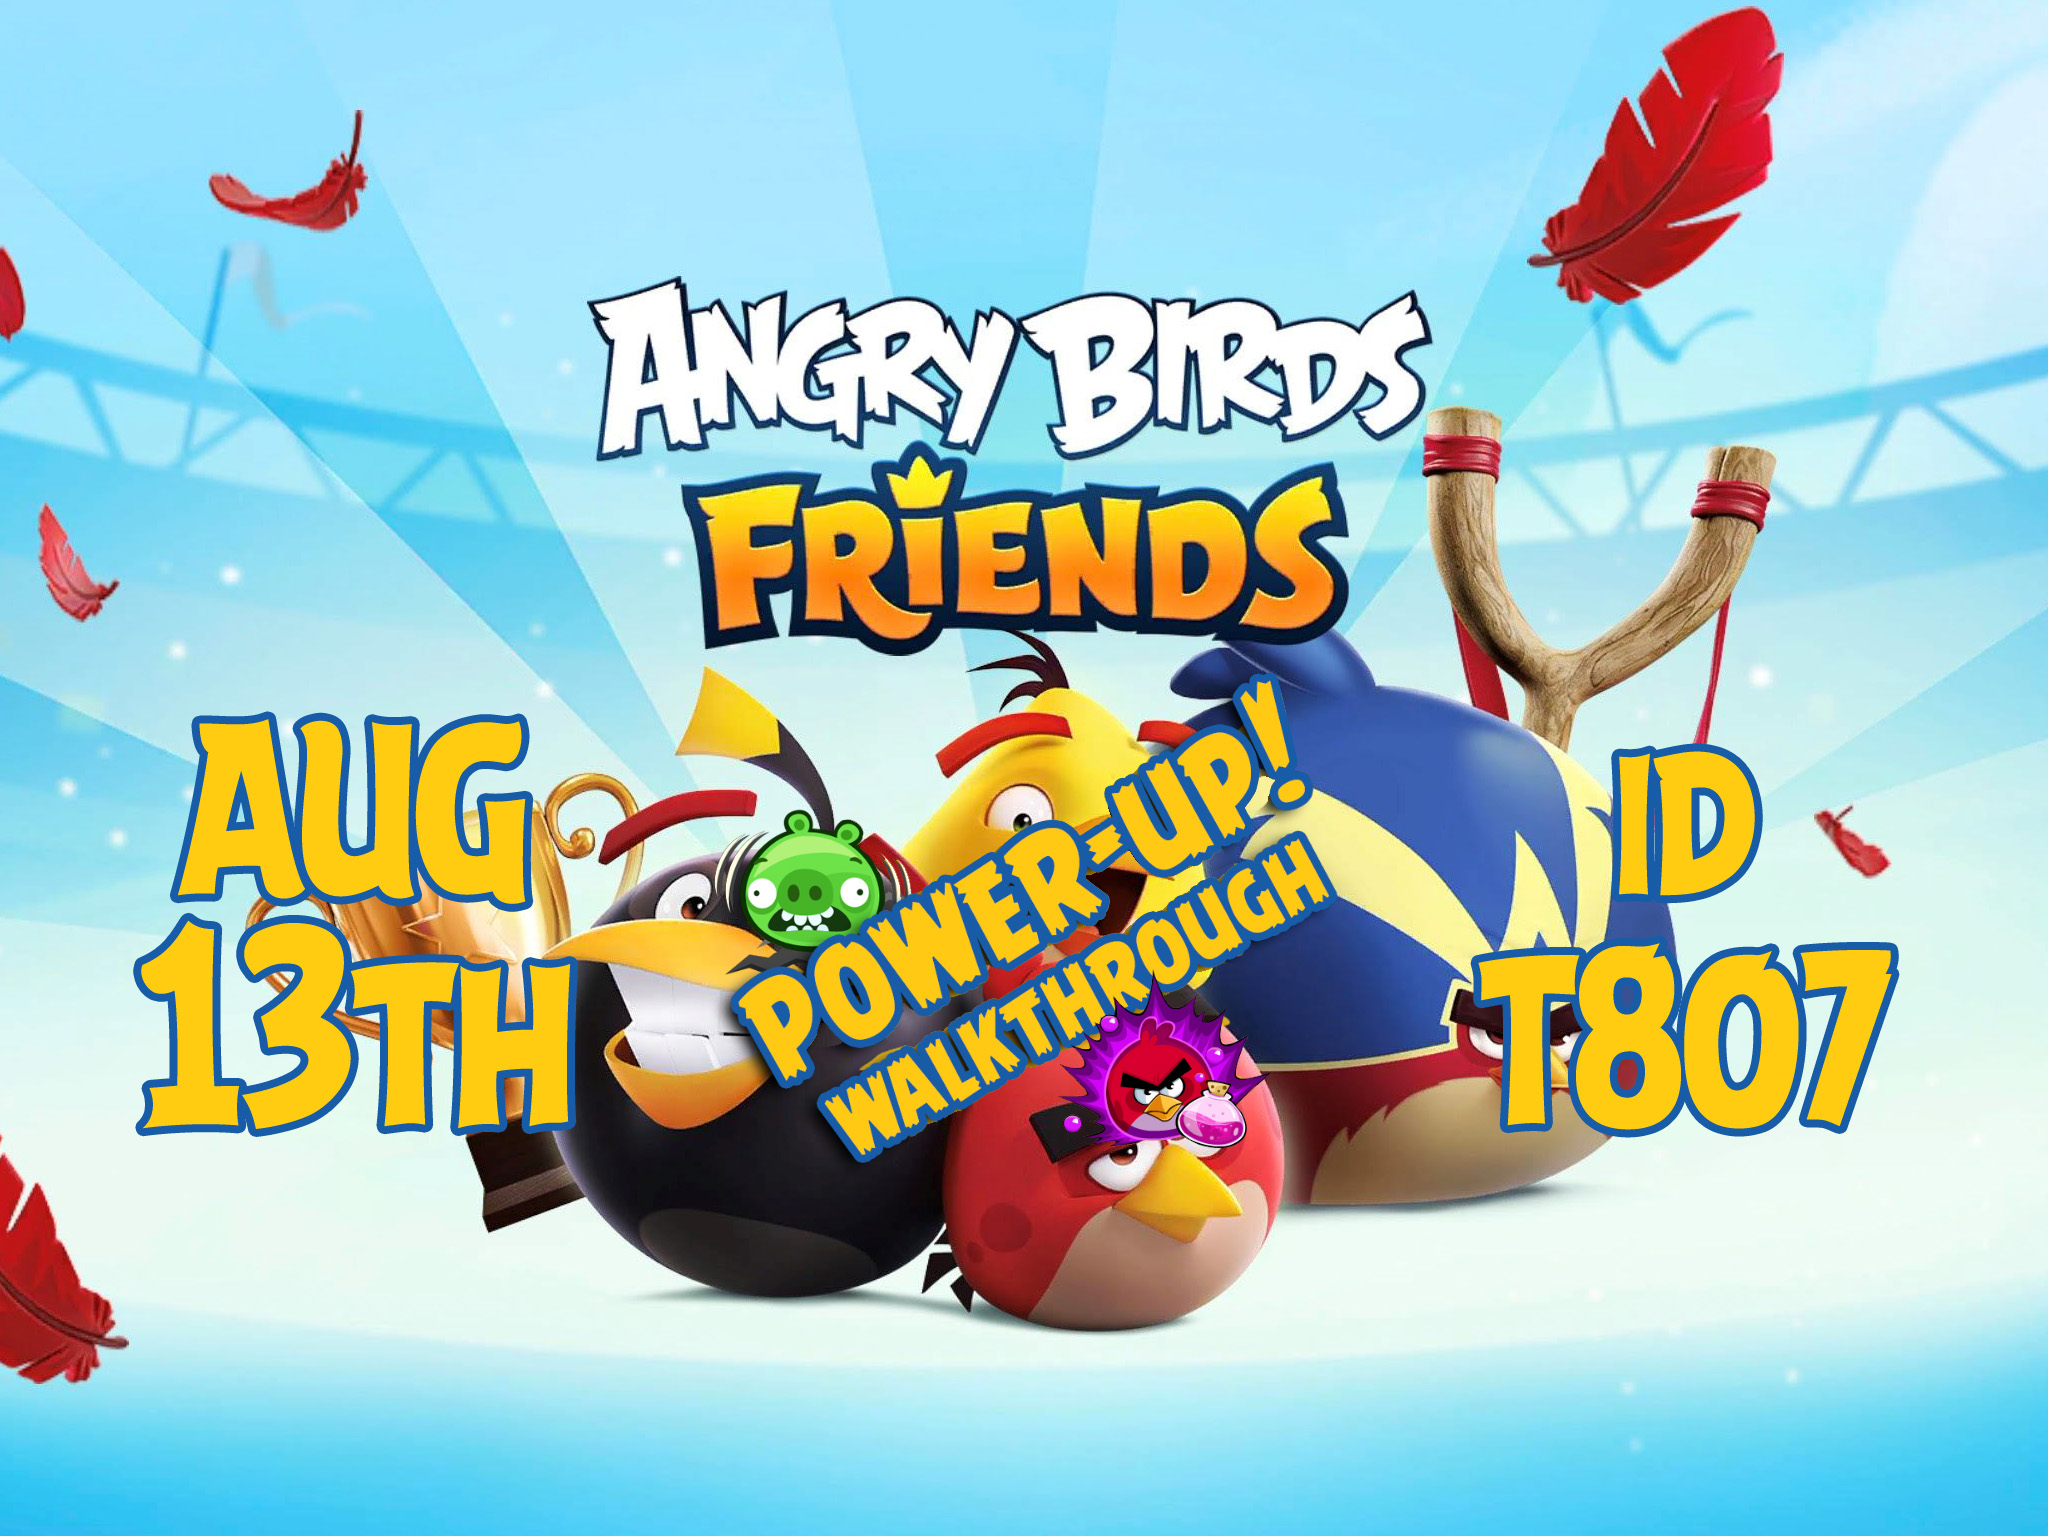 Angry-Birds-Friends-Tournament-T807-Feature-Image-PU